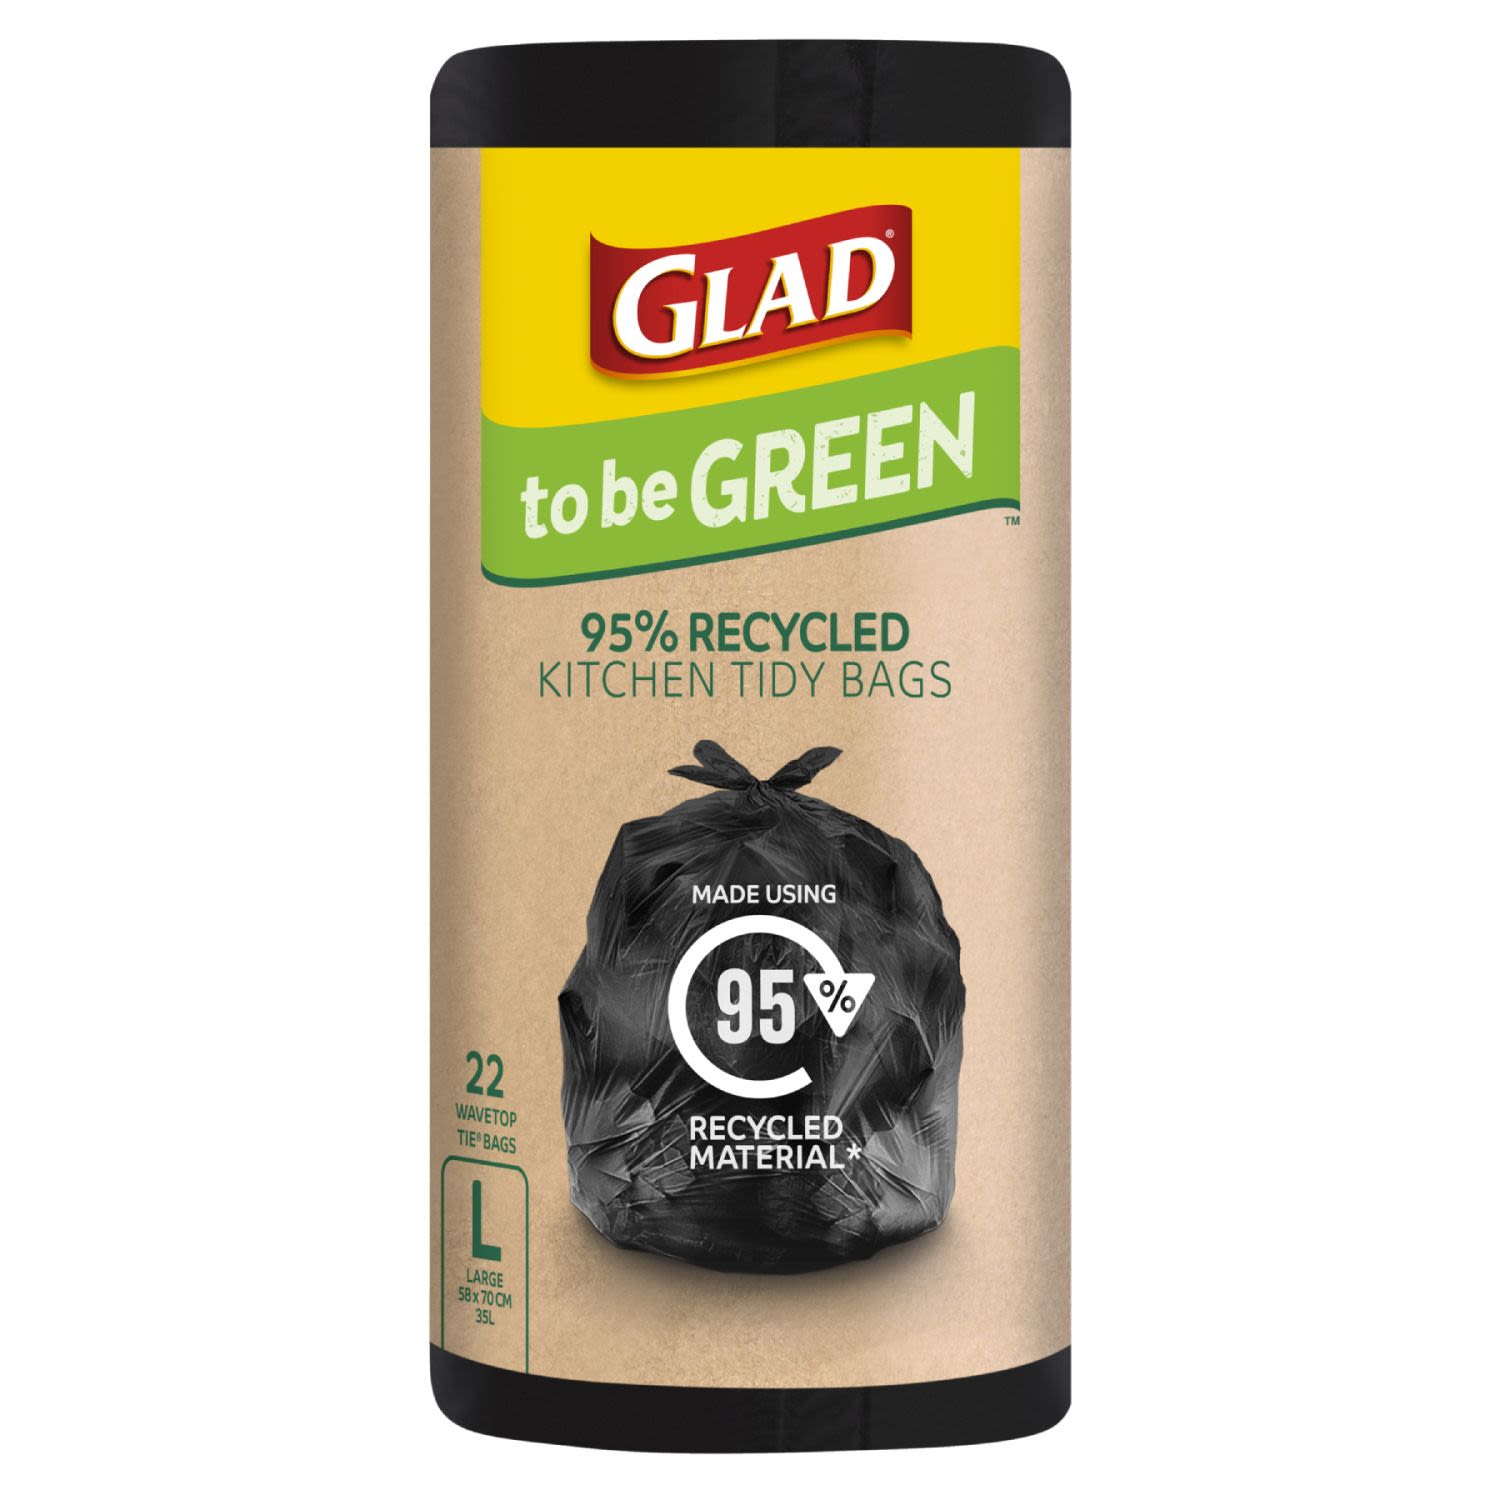 Glad to be Green 95% Recycled Kitchen Tidy Bags Large, 22 Each